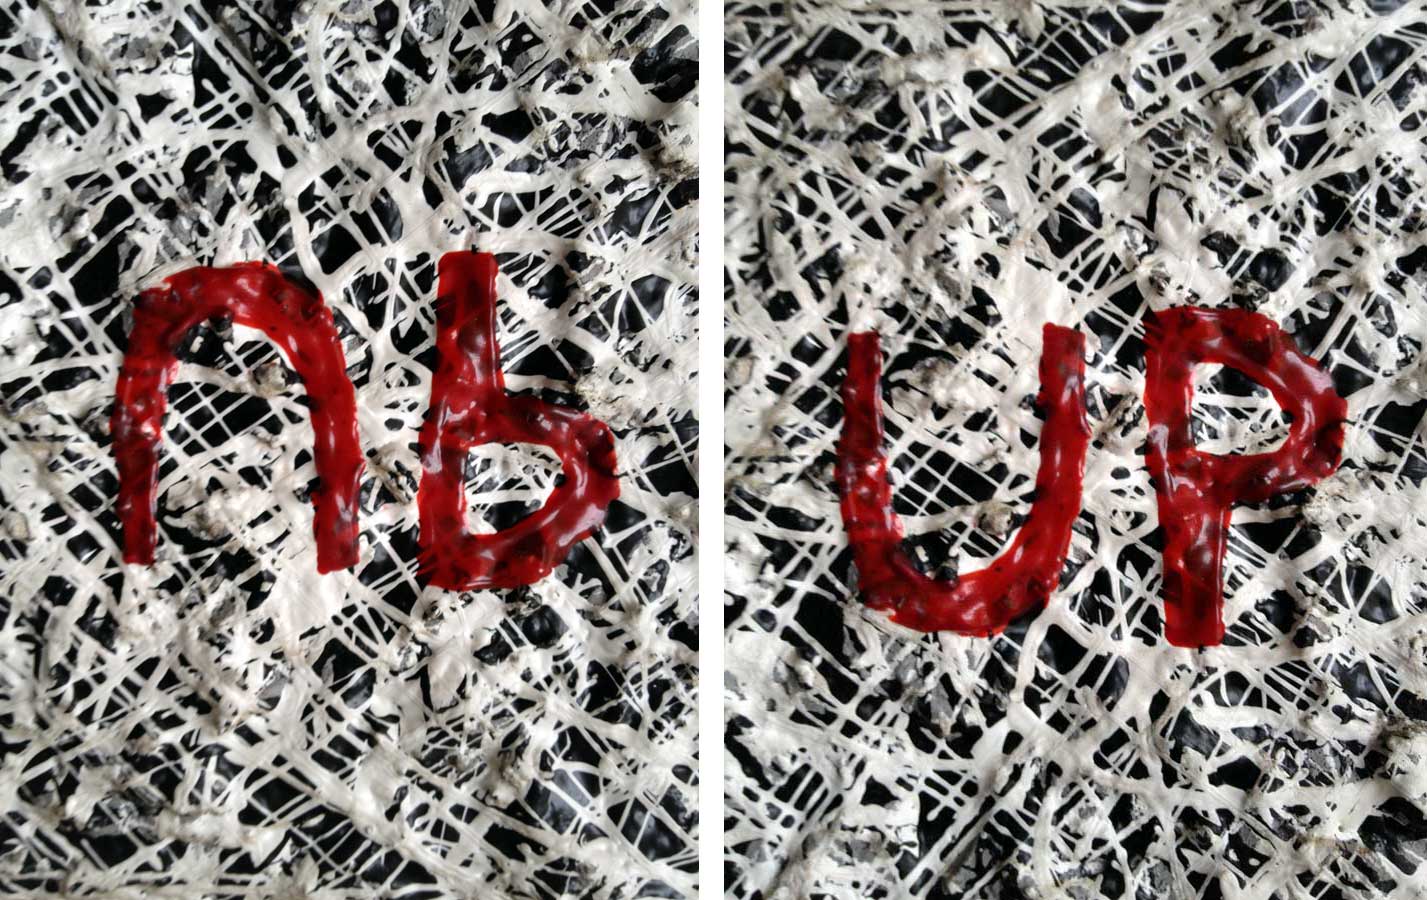 Up, painting by Nicola Guerraz, acrylic on canvas, diptych, 20 x 20 each, 2012, photo 01